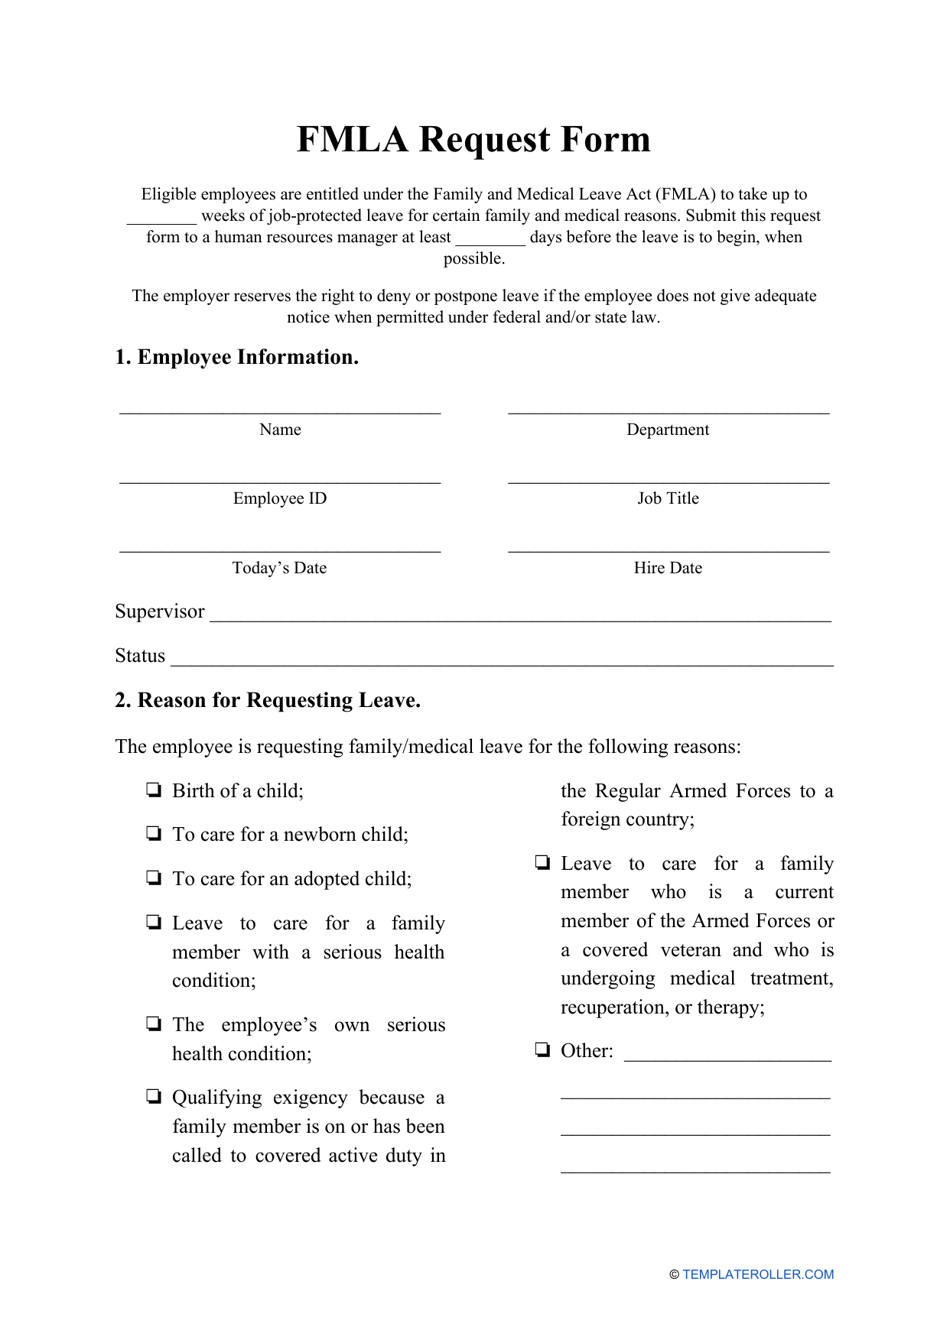 Fmla Request Form Fill Out Sign Online And Download PDF Templateroller